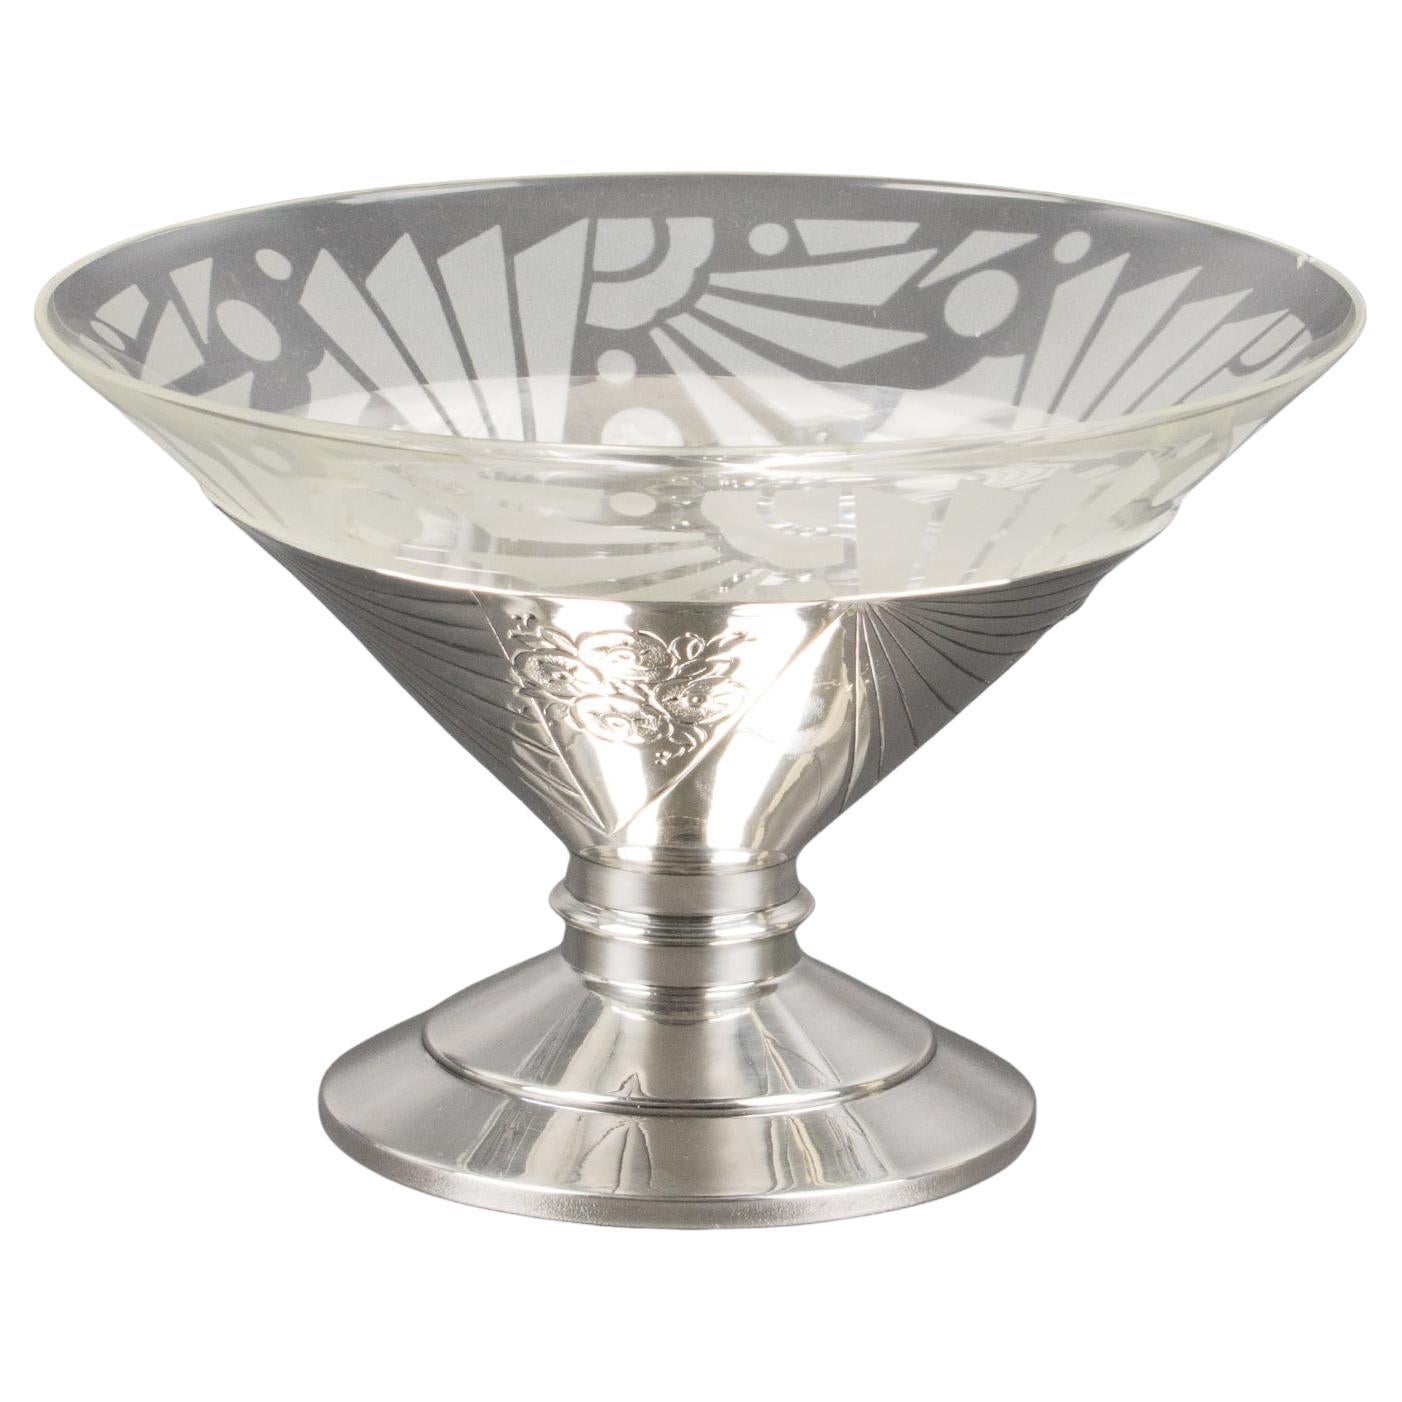 Art Deco Silver Plate and Etched Glass Centerpiece Bowl, 1930s